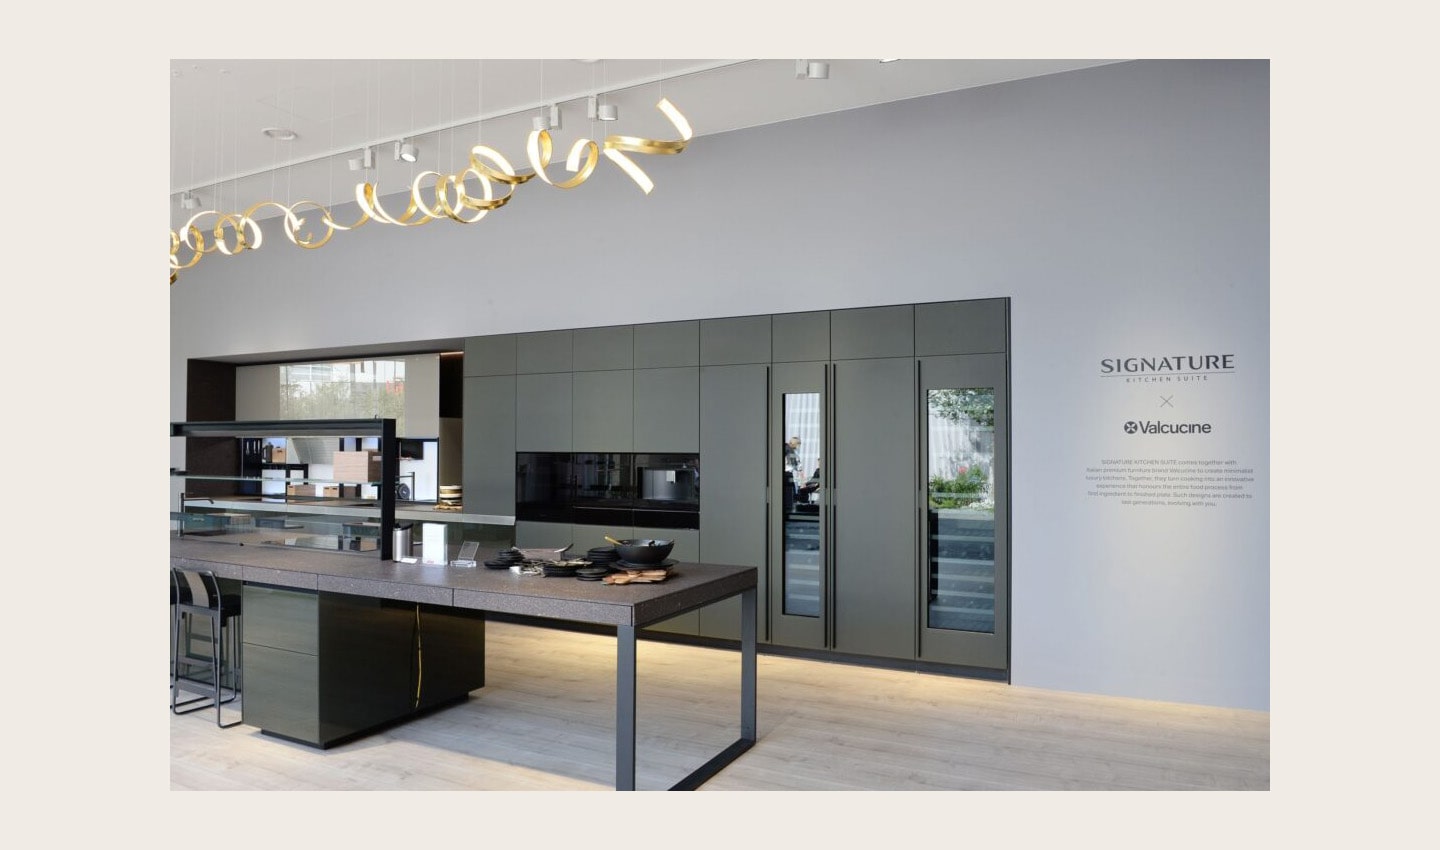 Side view of the LG Signature Kitchen Suite display zone designed in cooperation with Italian design company Valcucine